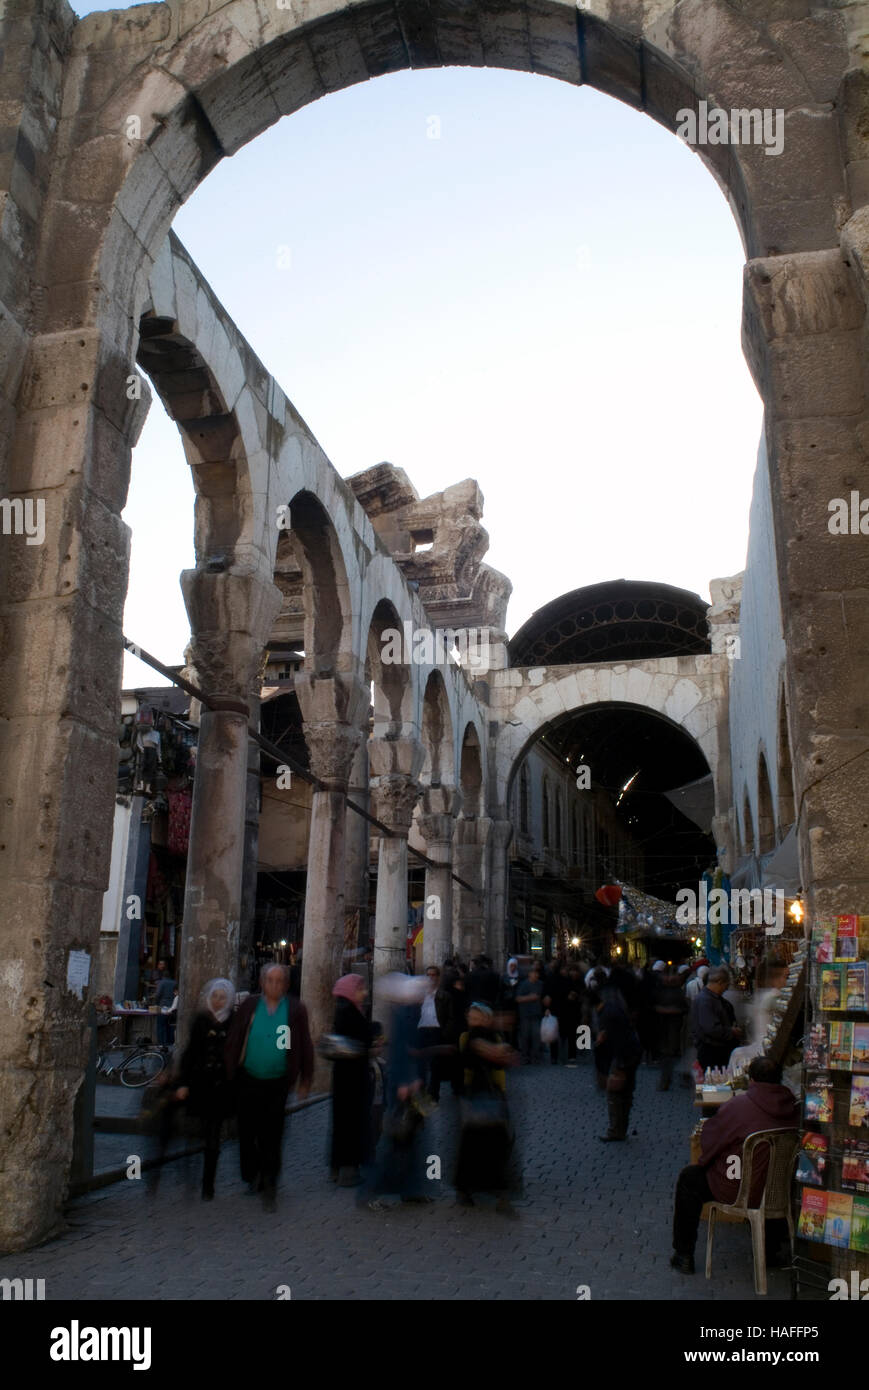 The entrance to the Souk al-Hamidiyeh in the Old Town of damascus, Syria, flanked by Roman columns. Stock Photo